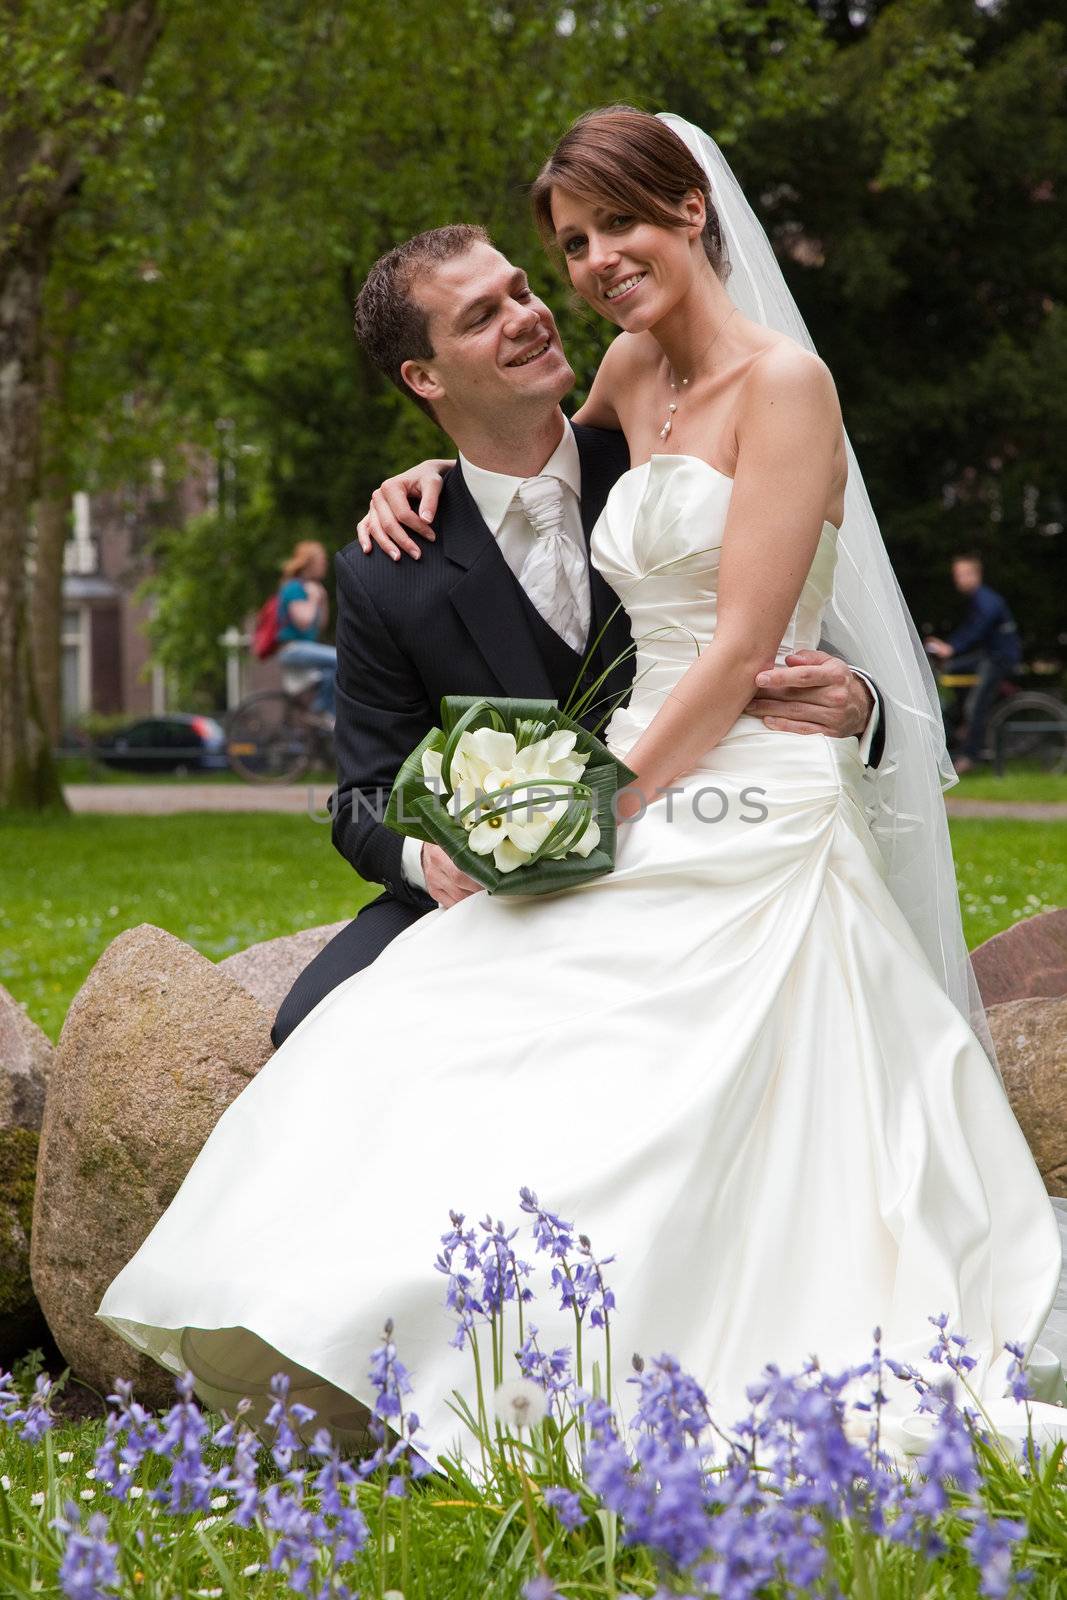 Beautiful bride and groom together in the park looking happy